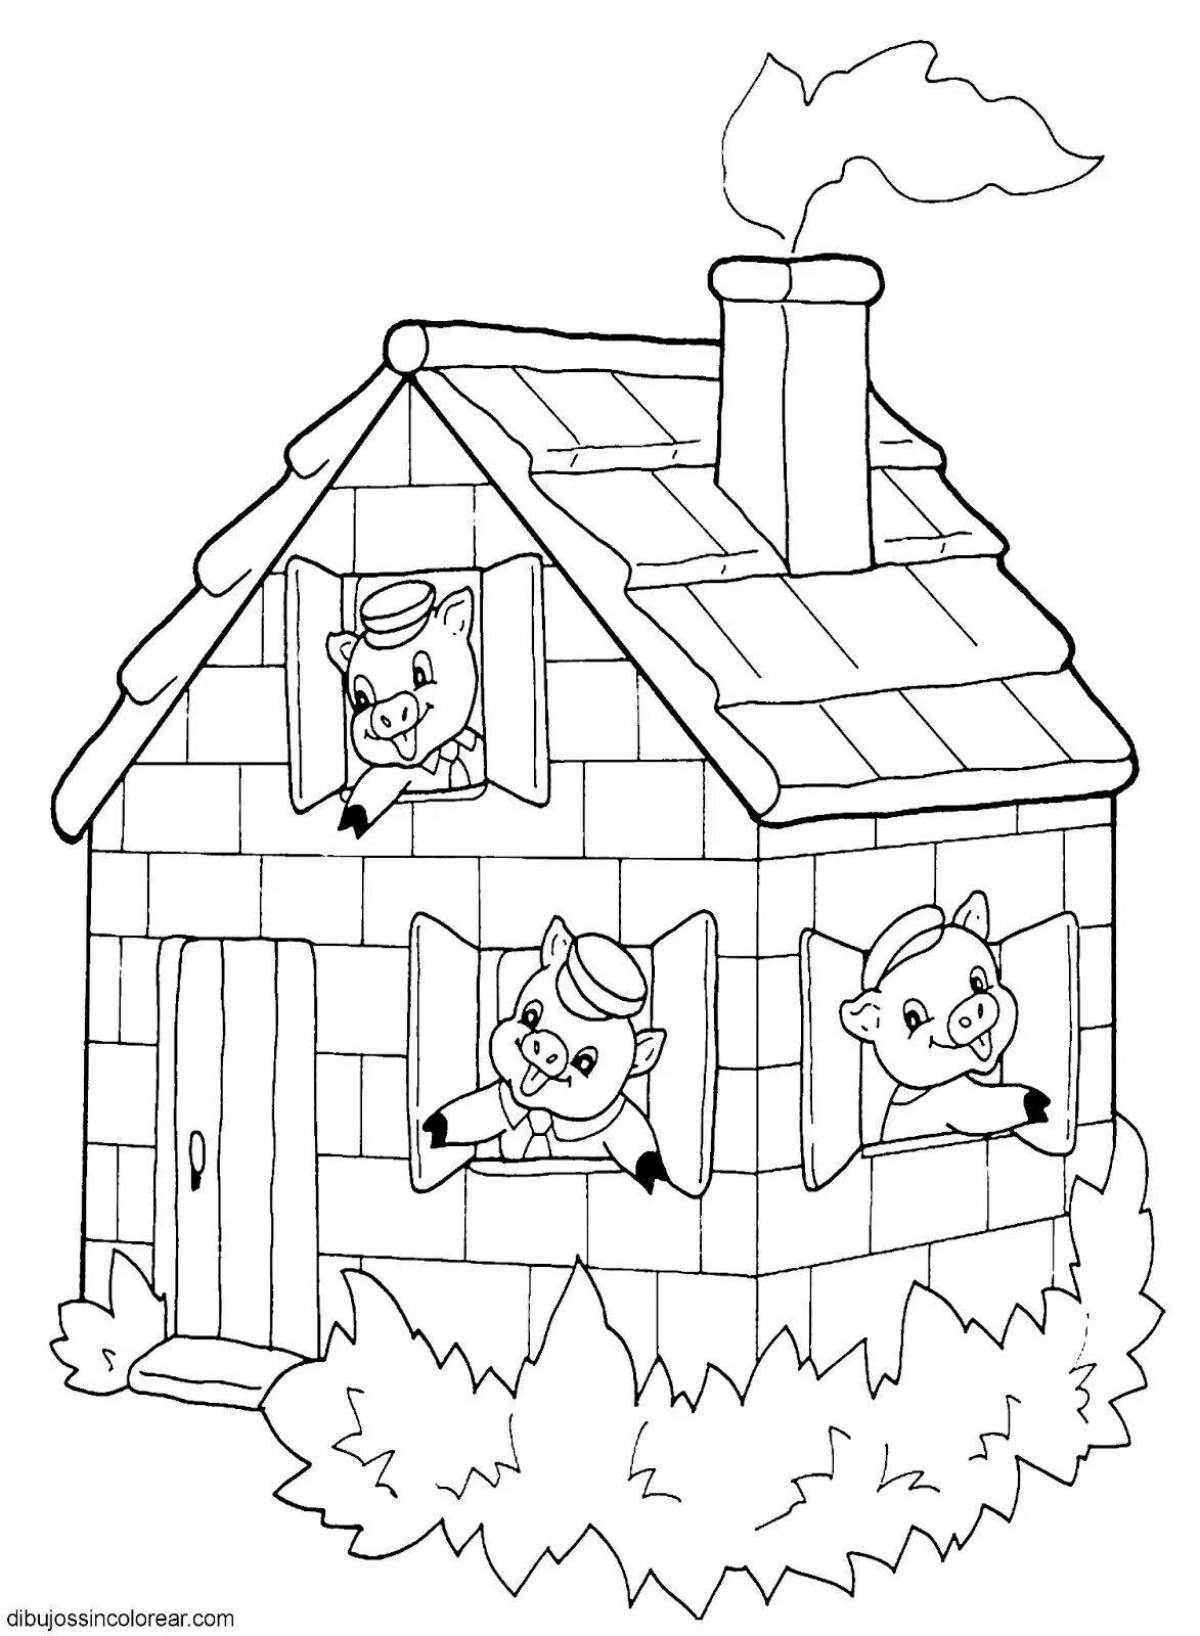 Ultimate cat house coloring book for kids